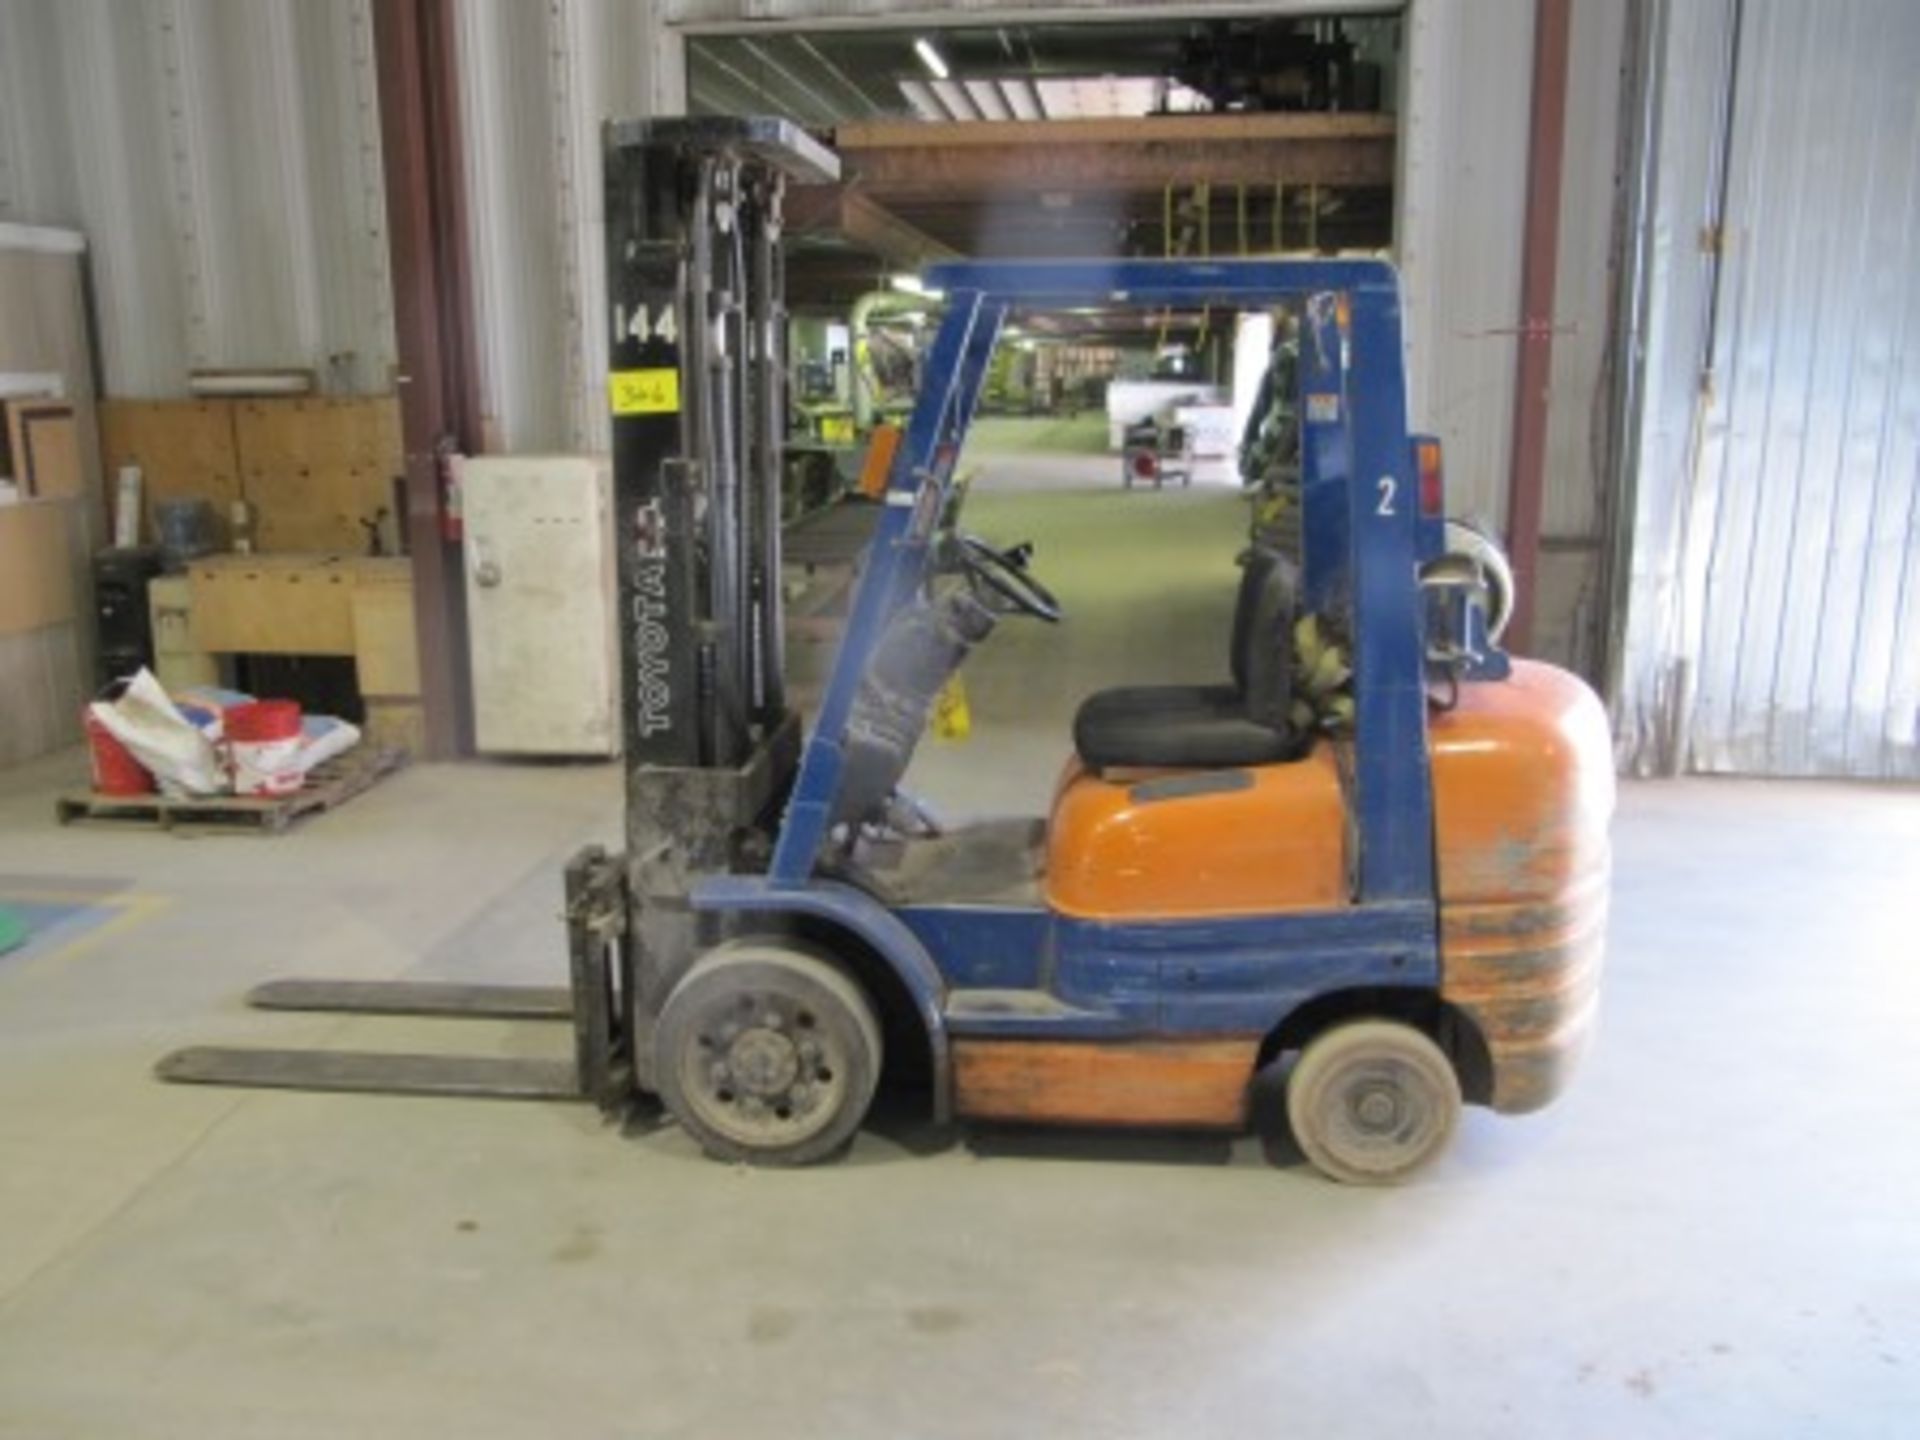 TOYOTA 52-6FGCU30 6,000# 3-STAGE PROPANE FORKLIFT W/SIDESHIFT   S/N:  60289  APPROX. 12,968